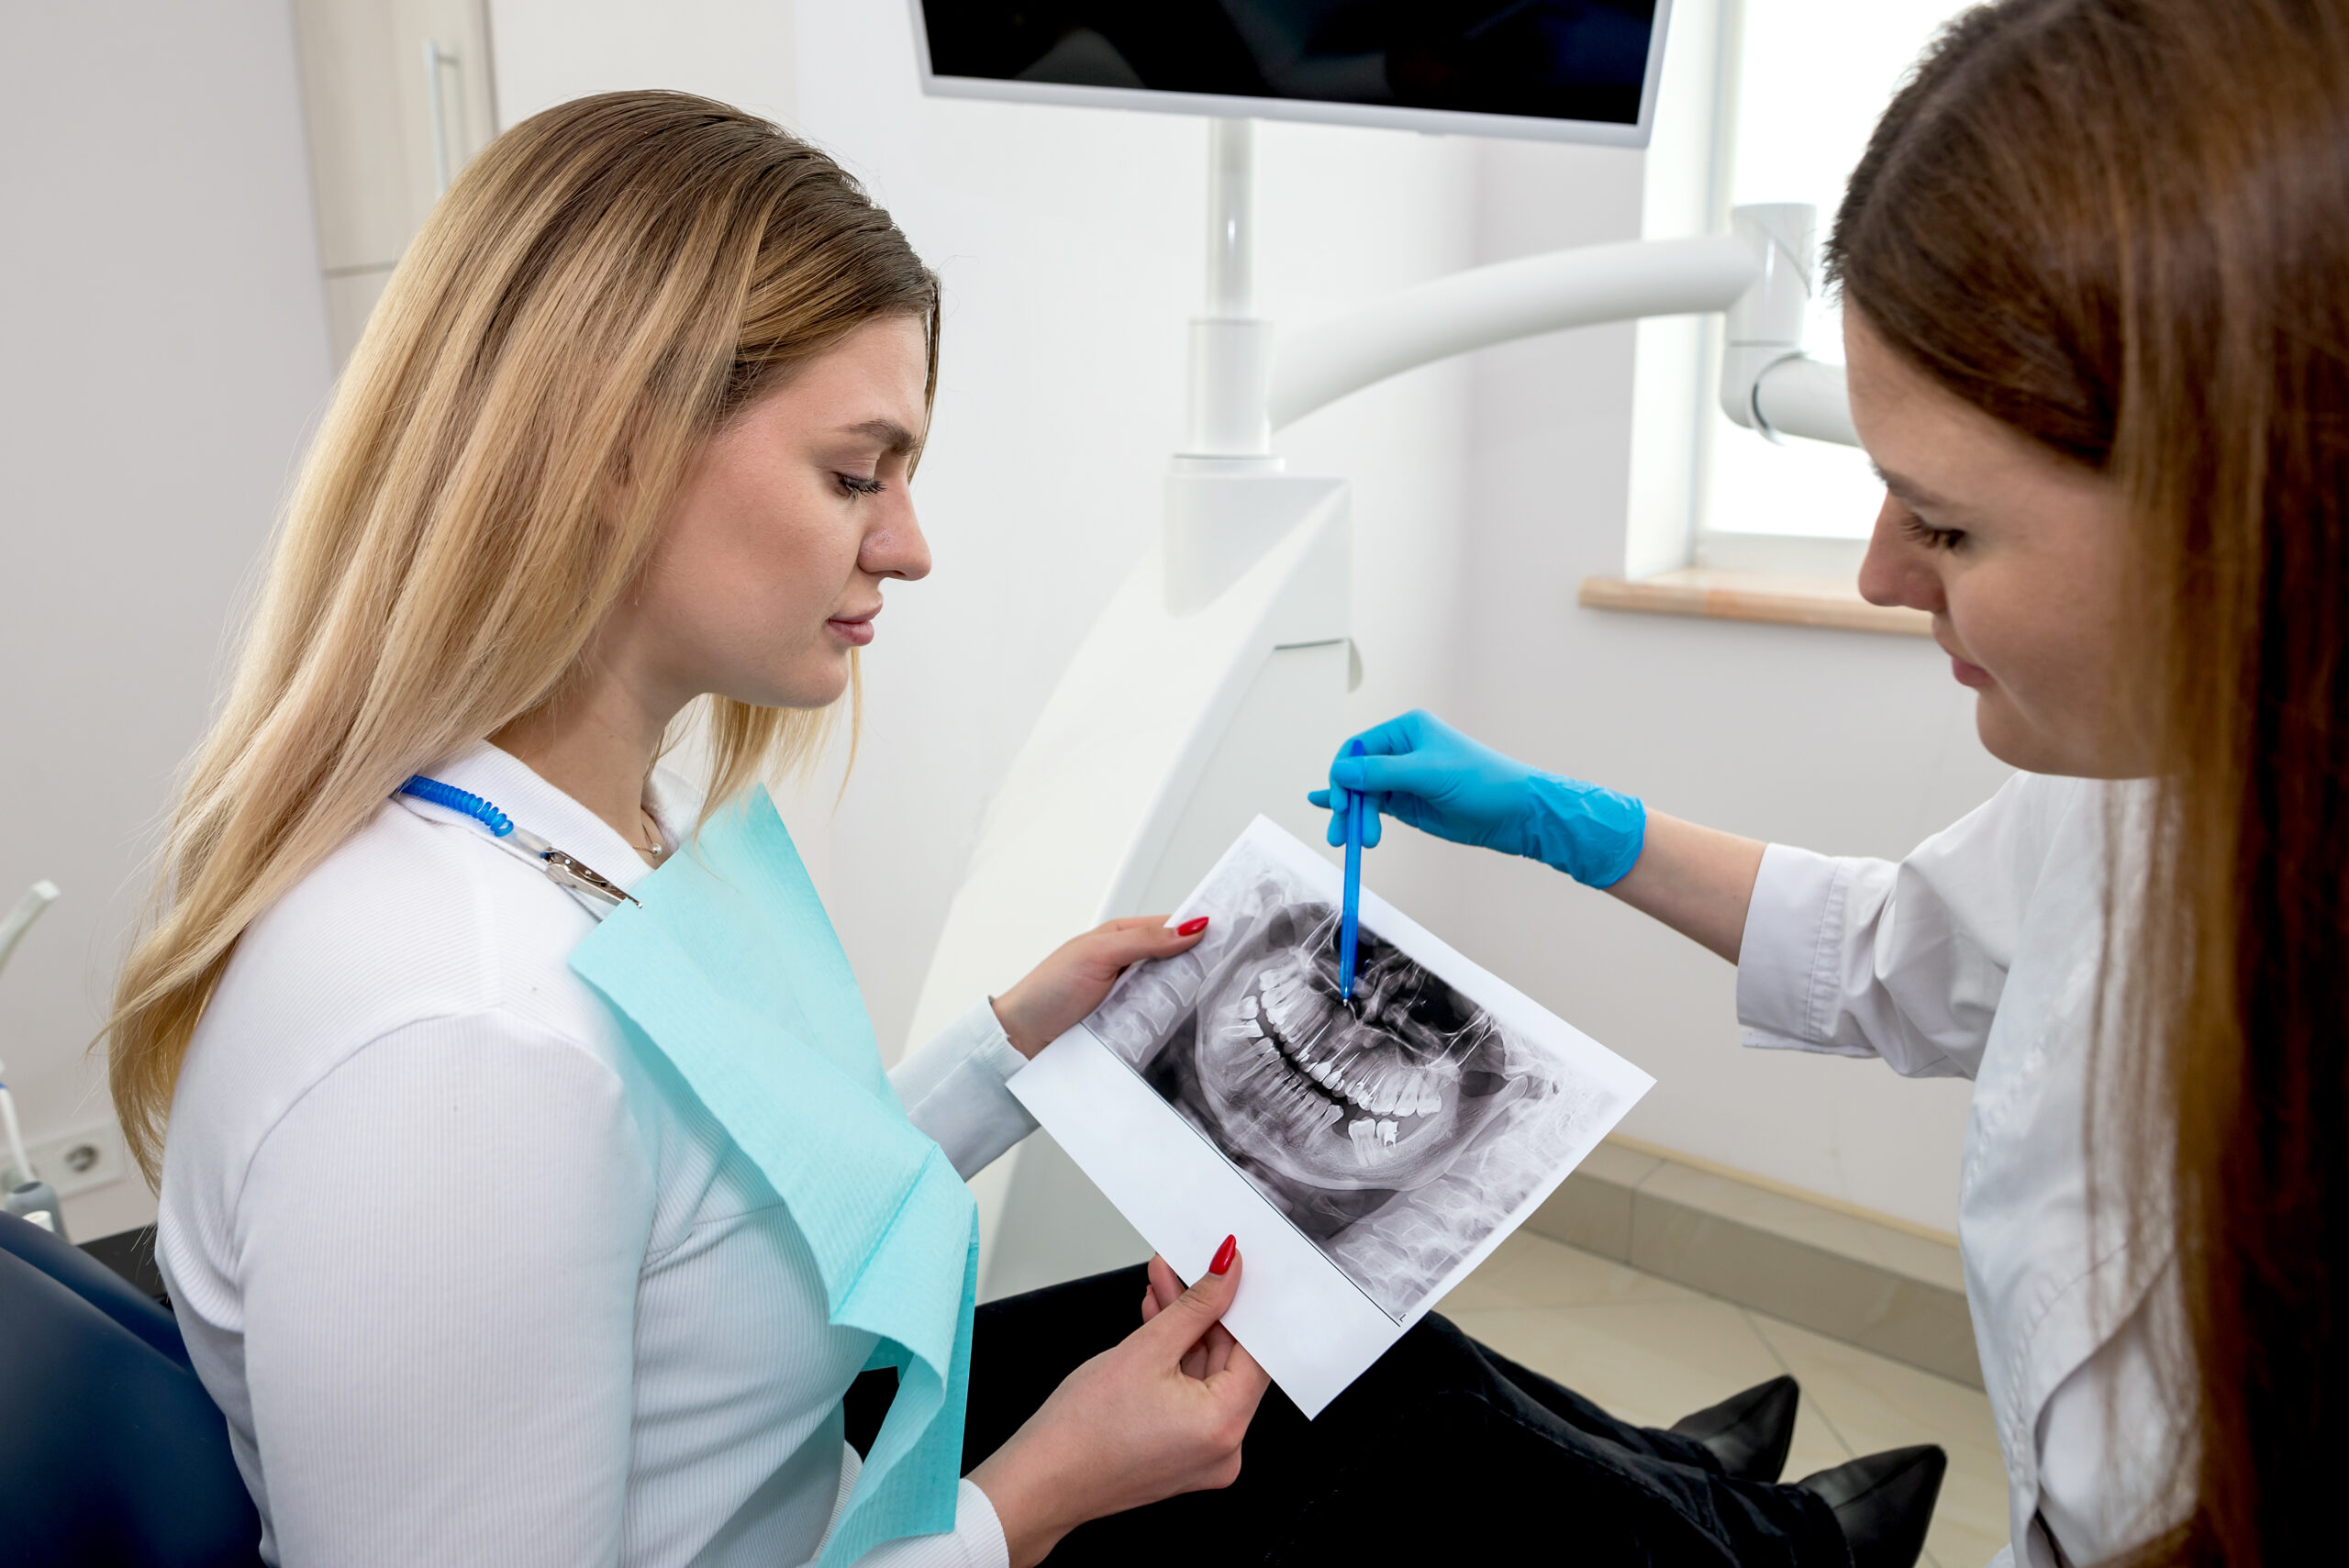 Dentist shows X-Ray Image to patient.